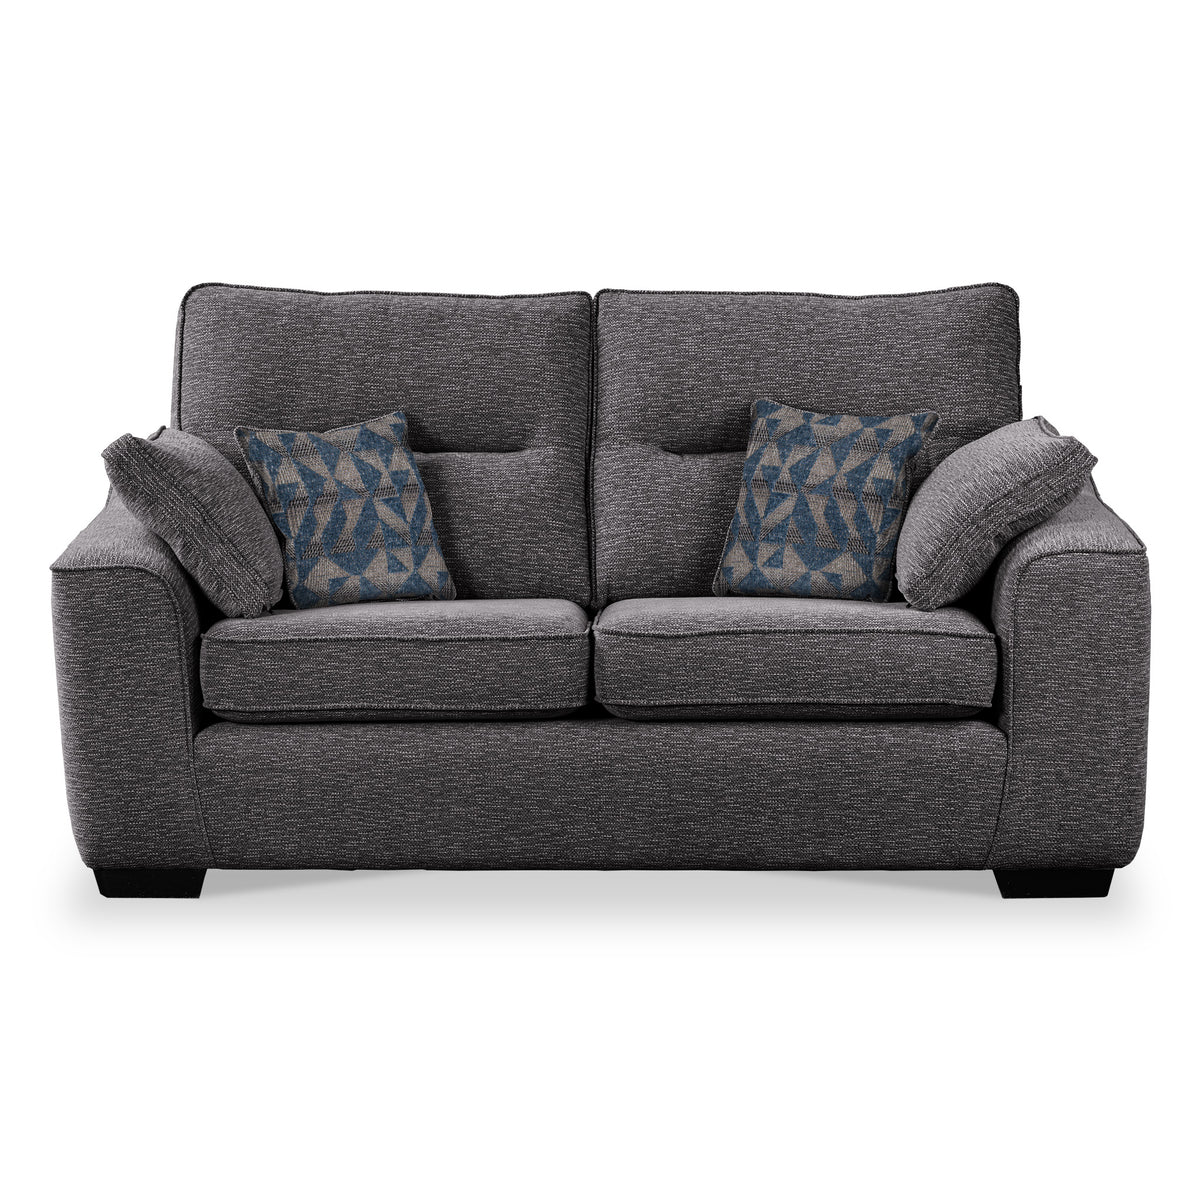 Sudbury Charcoal 2 Seater Sofabed with Aegean Scatter Cushions from Roseland Furniture